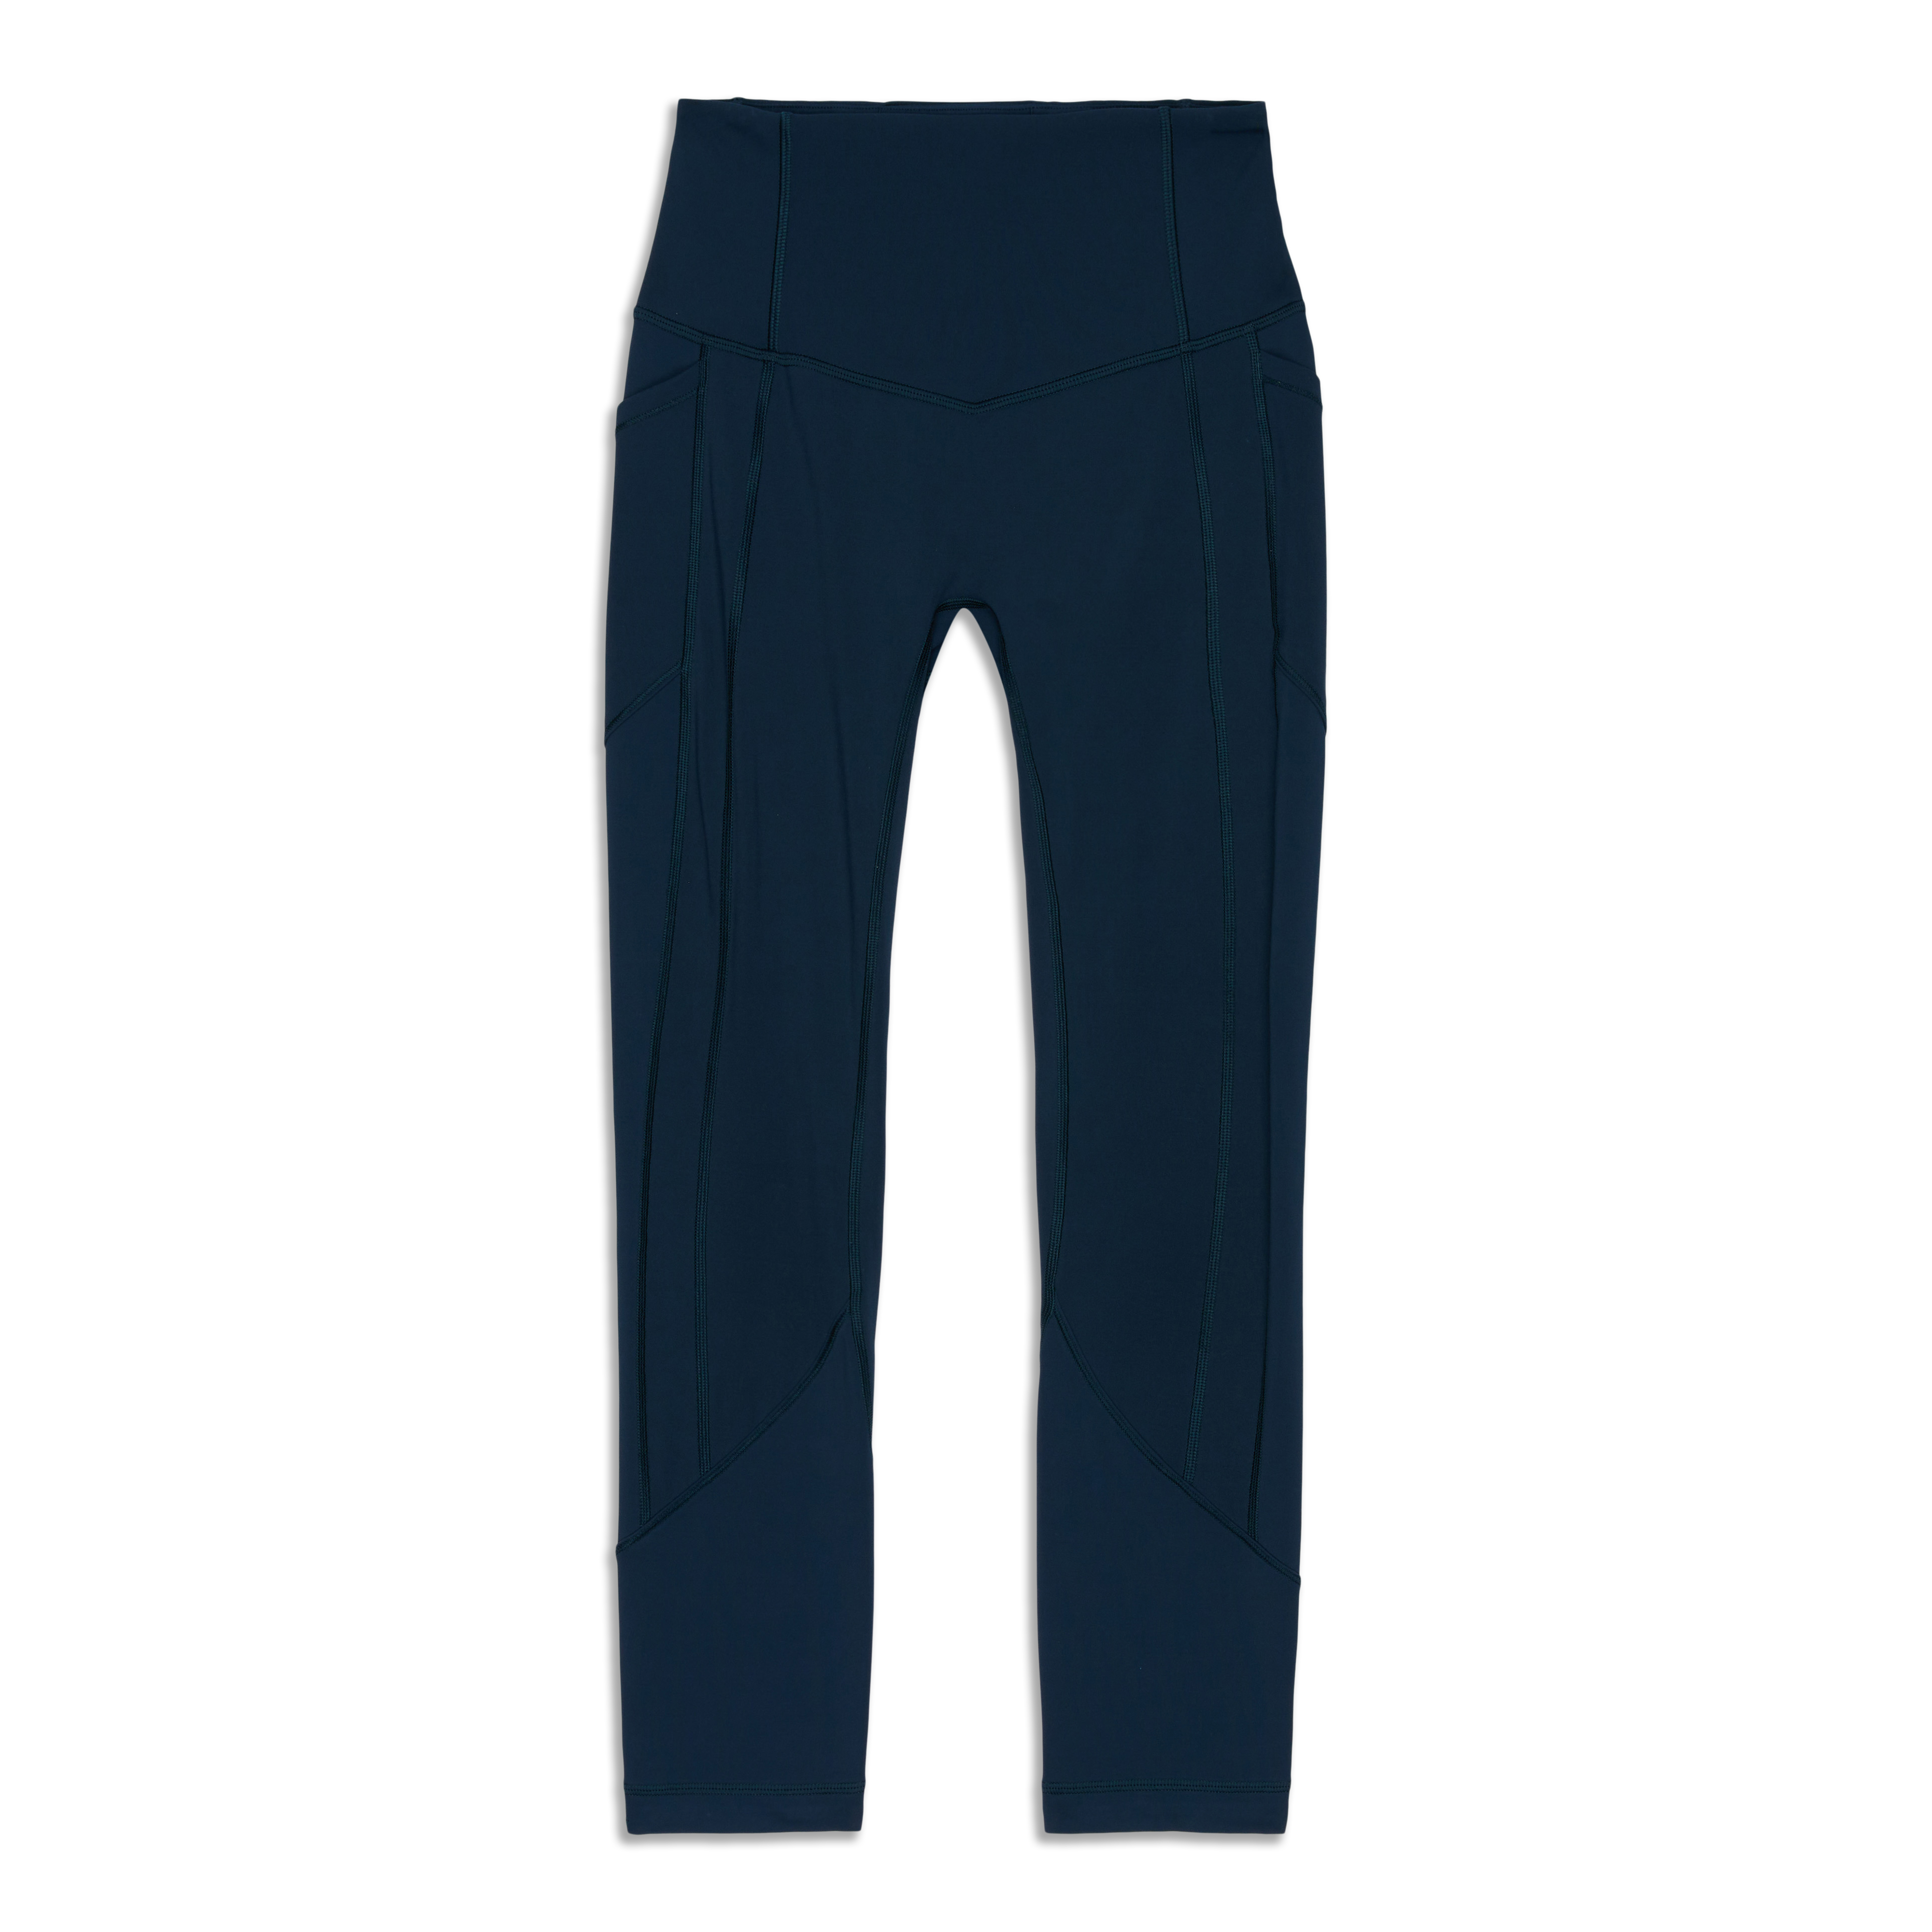 all the right places pant, women's pants